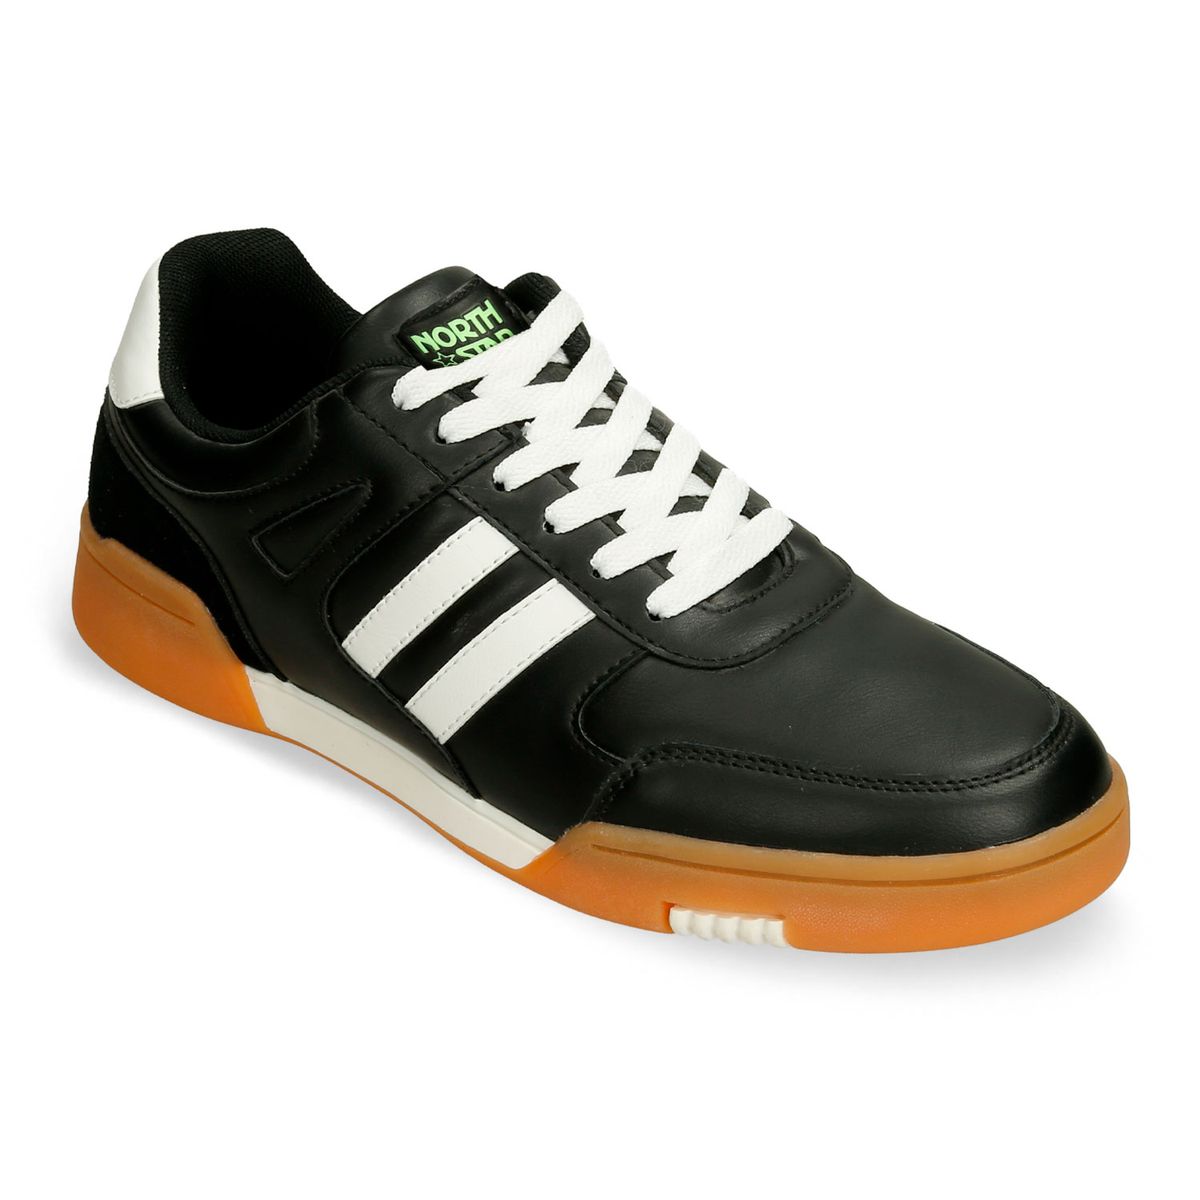 Tenis Casuales Negro North Star Javier Terry Hombre